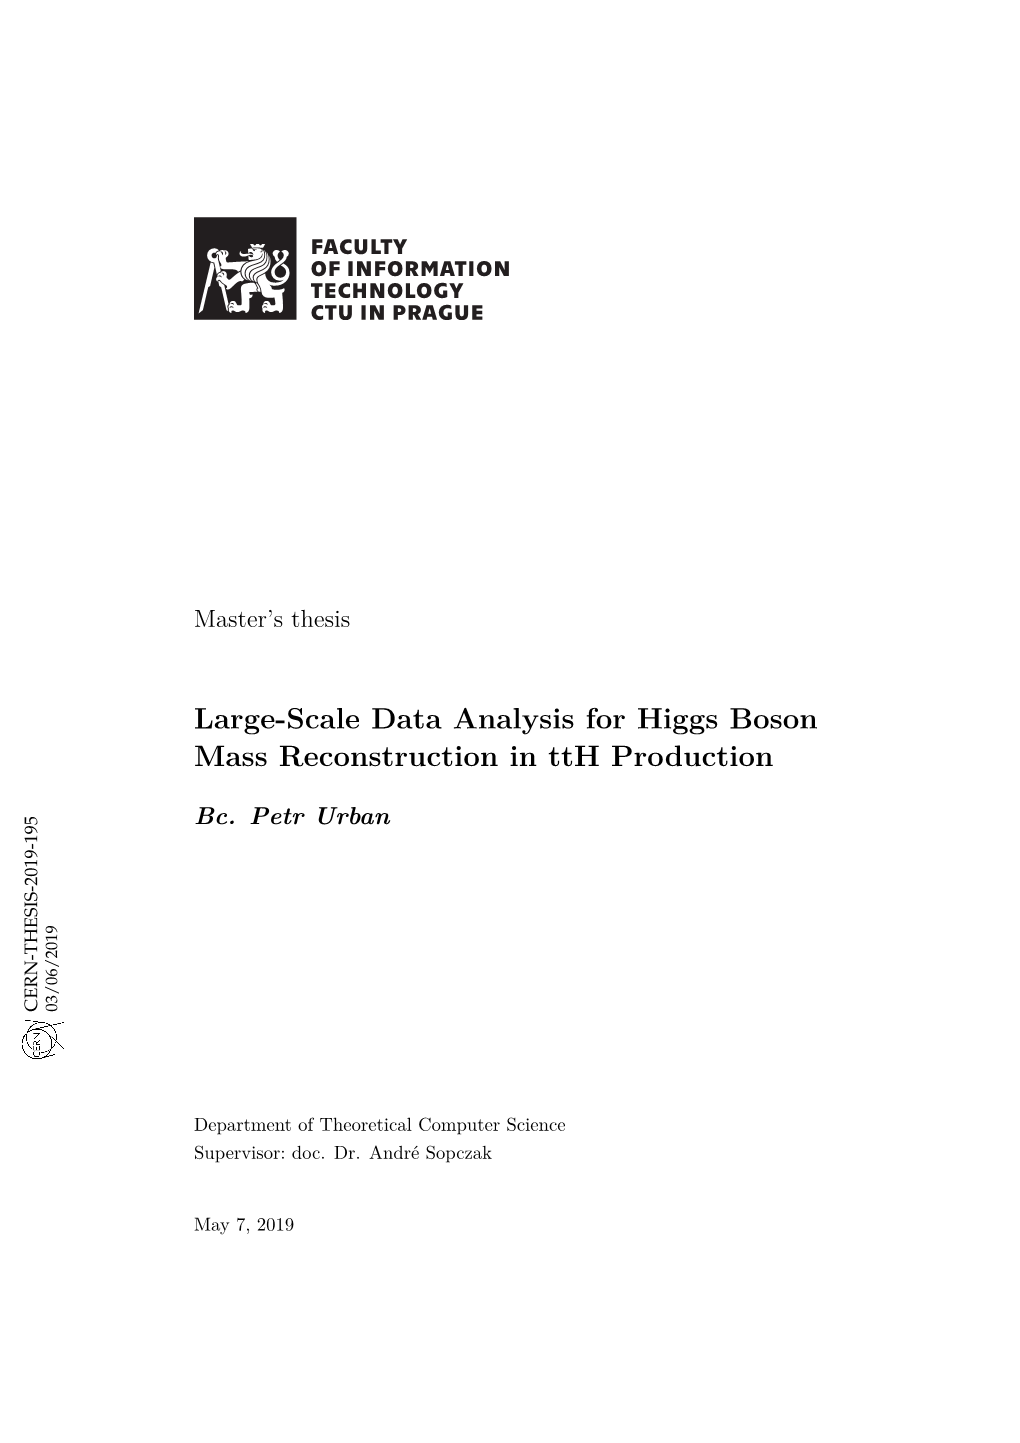 Large-Scale Data Analysis for Higgs Boson Mass Reconstruction in Tth Production